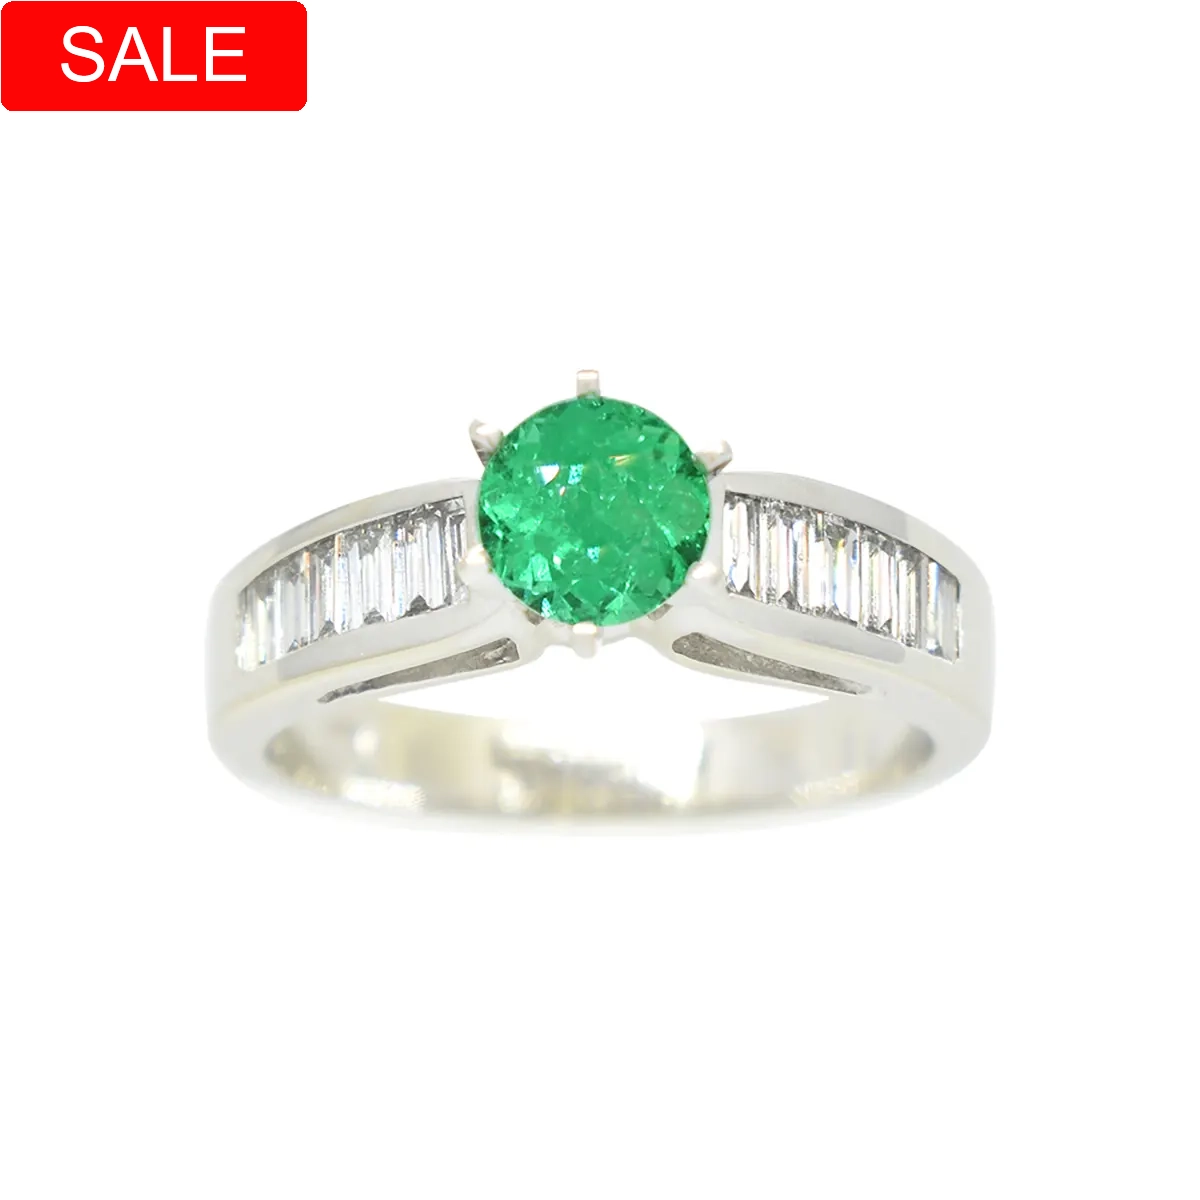 Emerald Ring with Baguette Diamonds in Channel Setting in White Gold